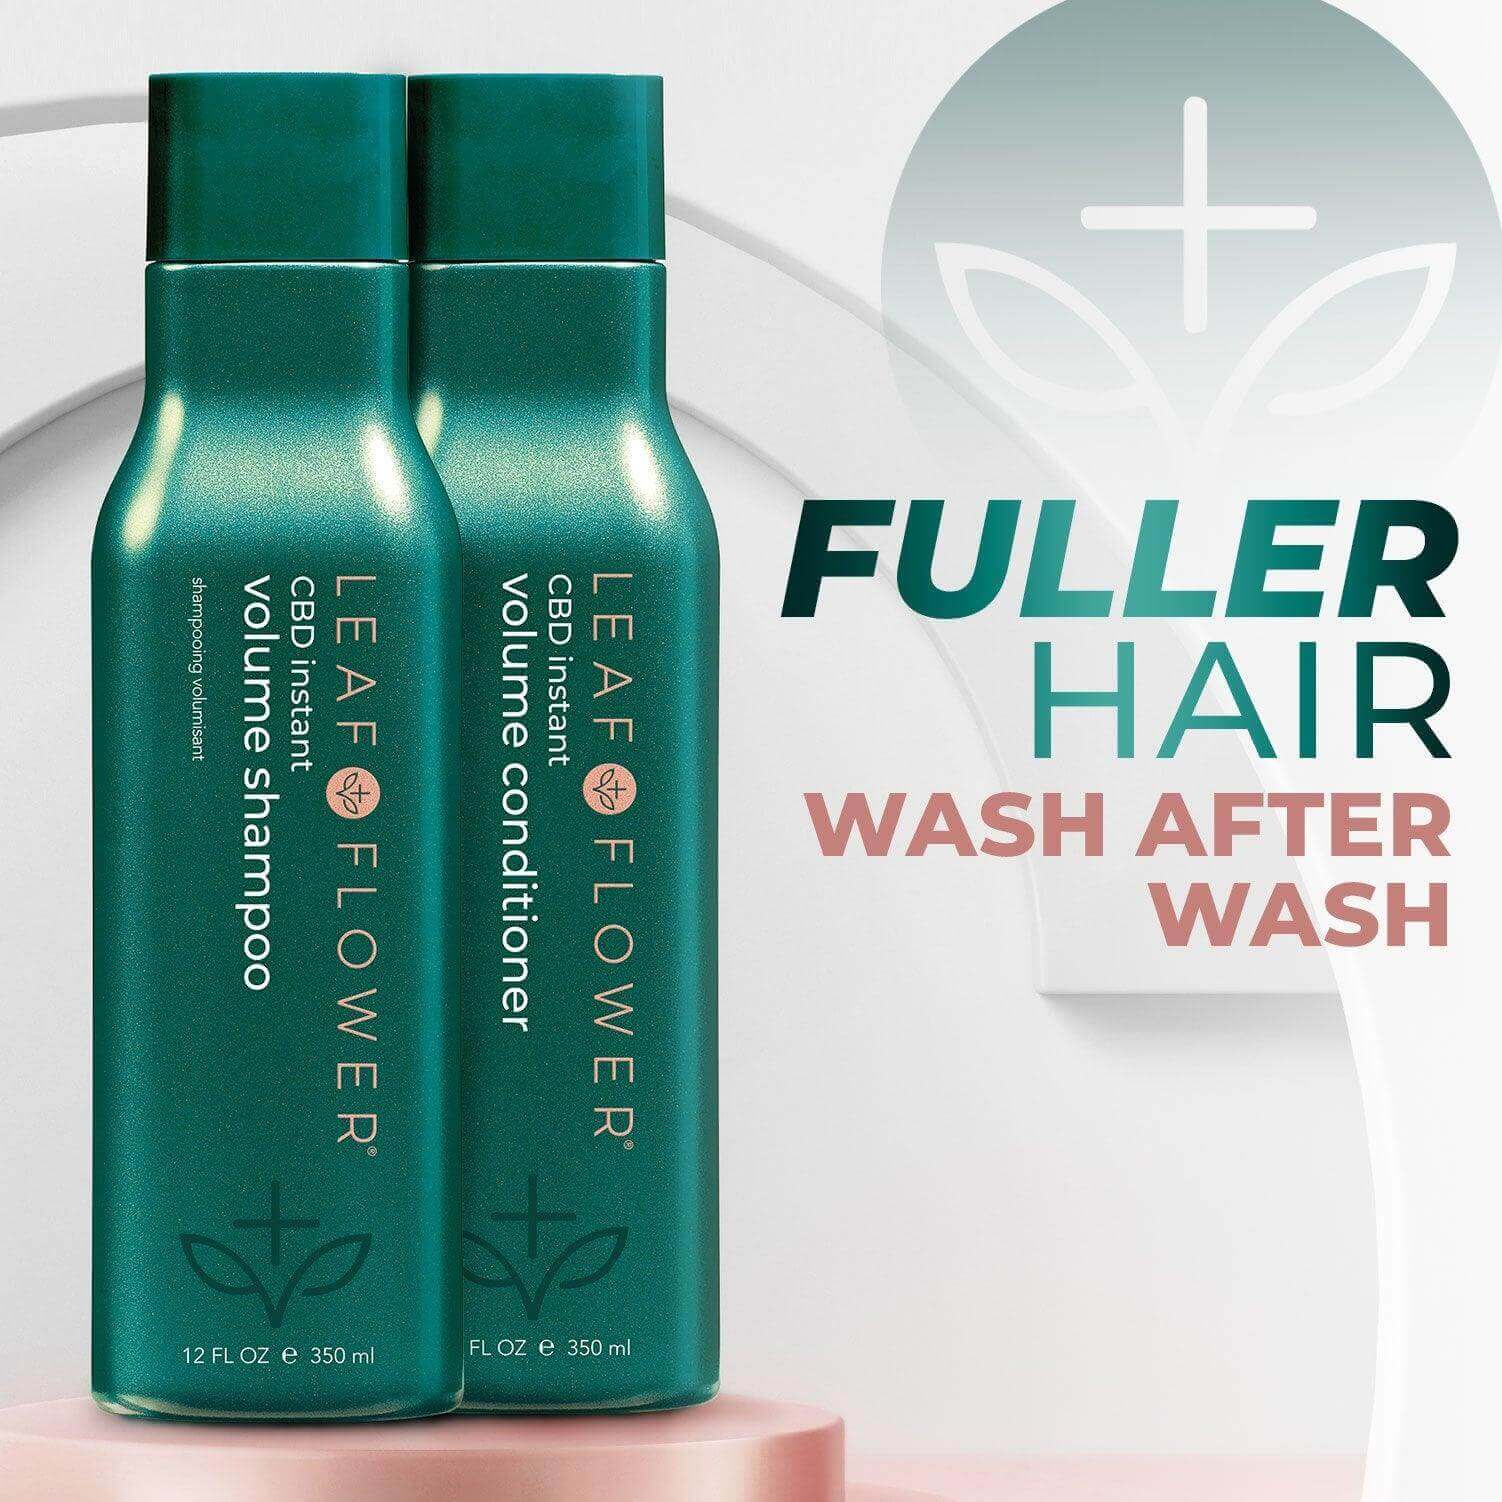 Two teal bottles labeled as Leaf and Flower LEAF and FLOWER Instant Volume Conditioner and Instant Volume Shampoo are displayed. The text reads, "Fuller hair wash after wash.